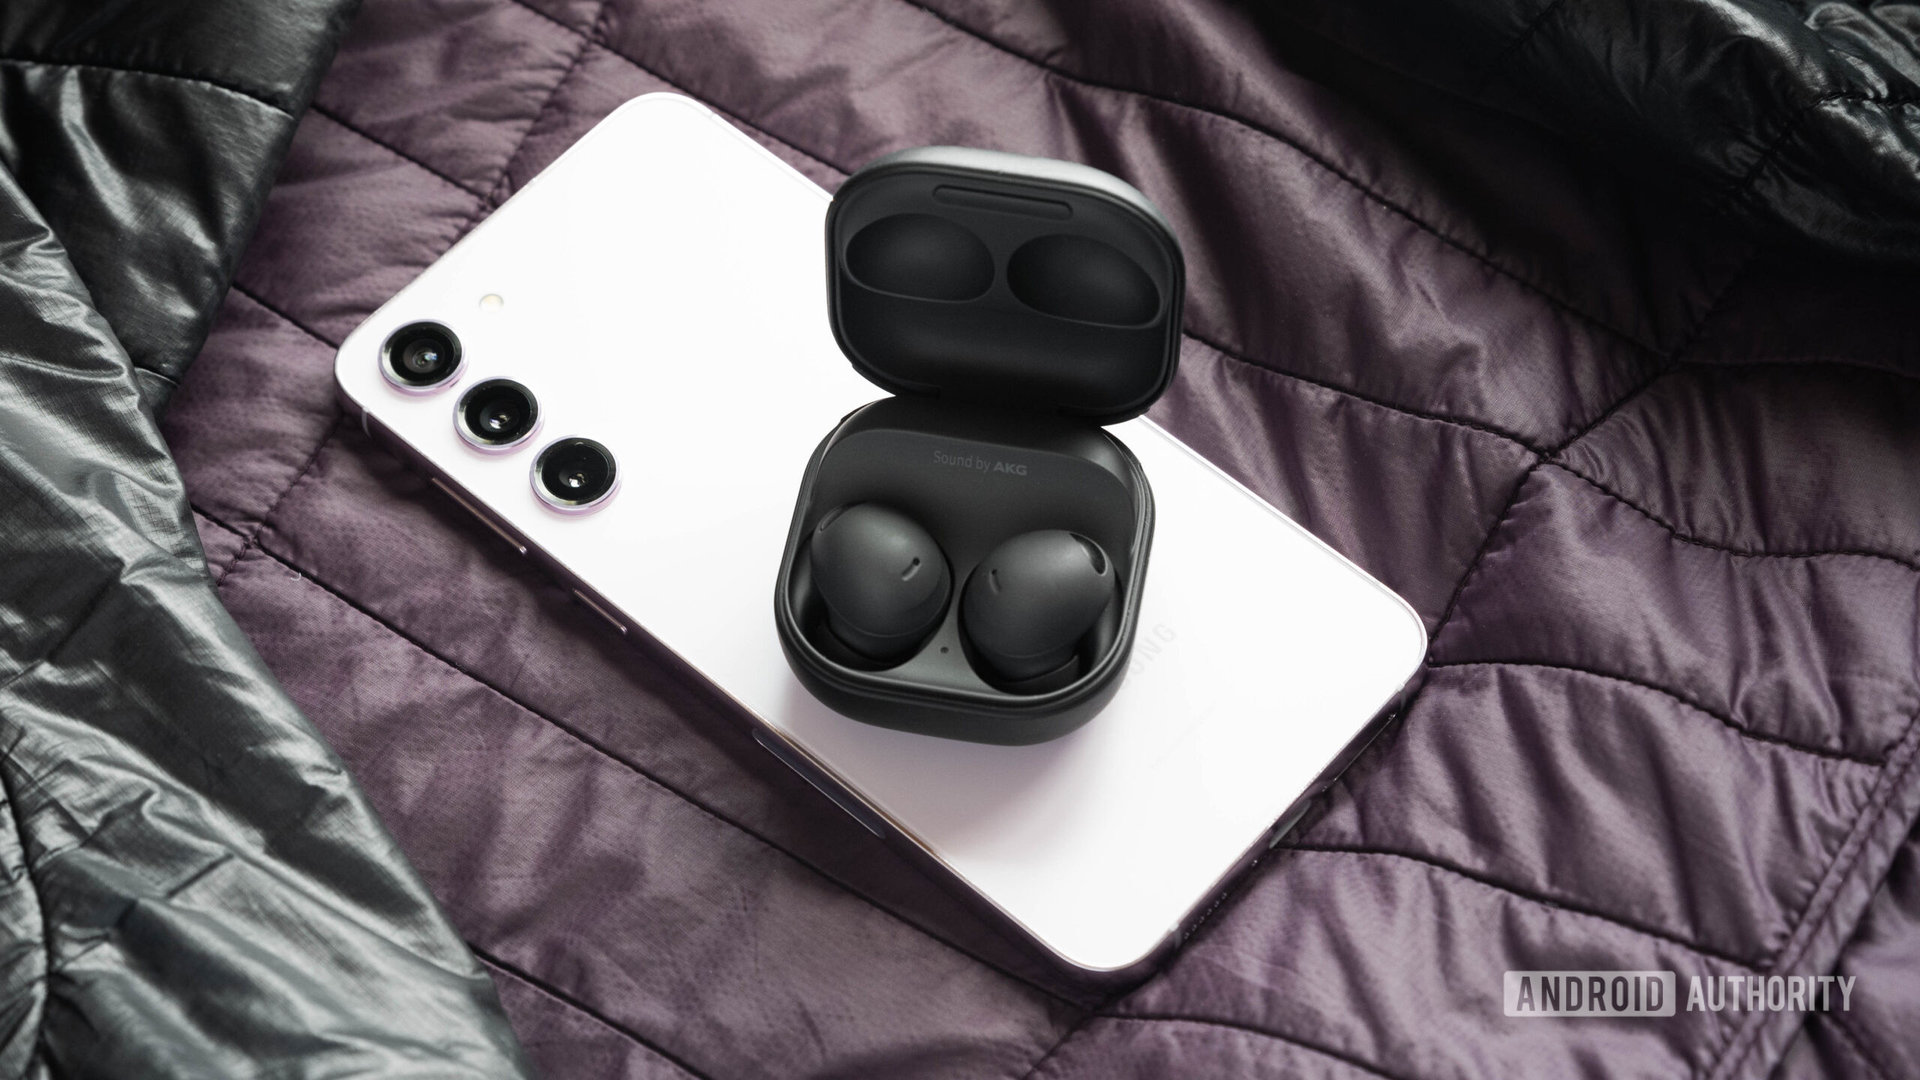 Some handy Galaxy AI features are coming to Galaxy Buds